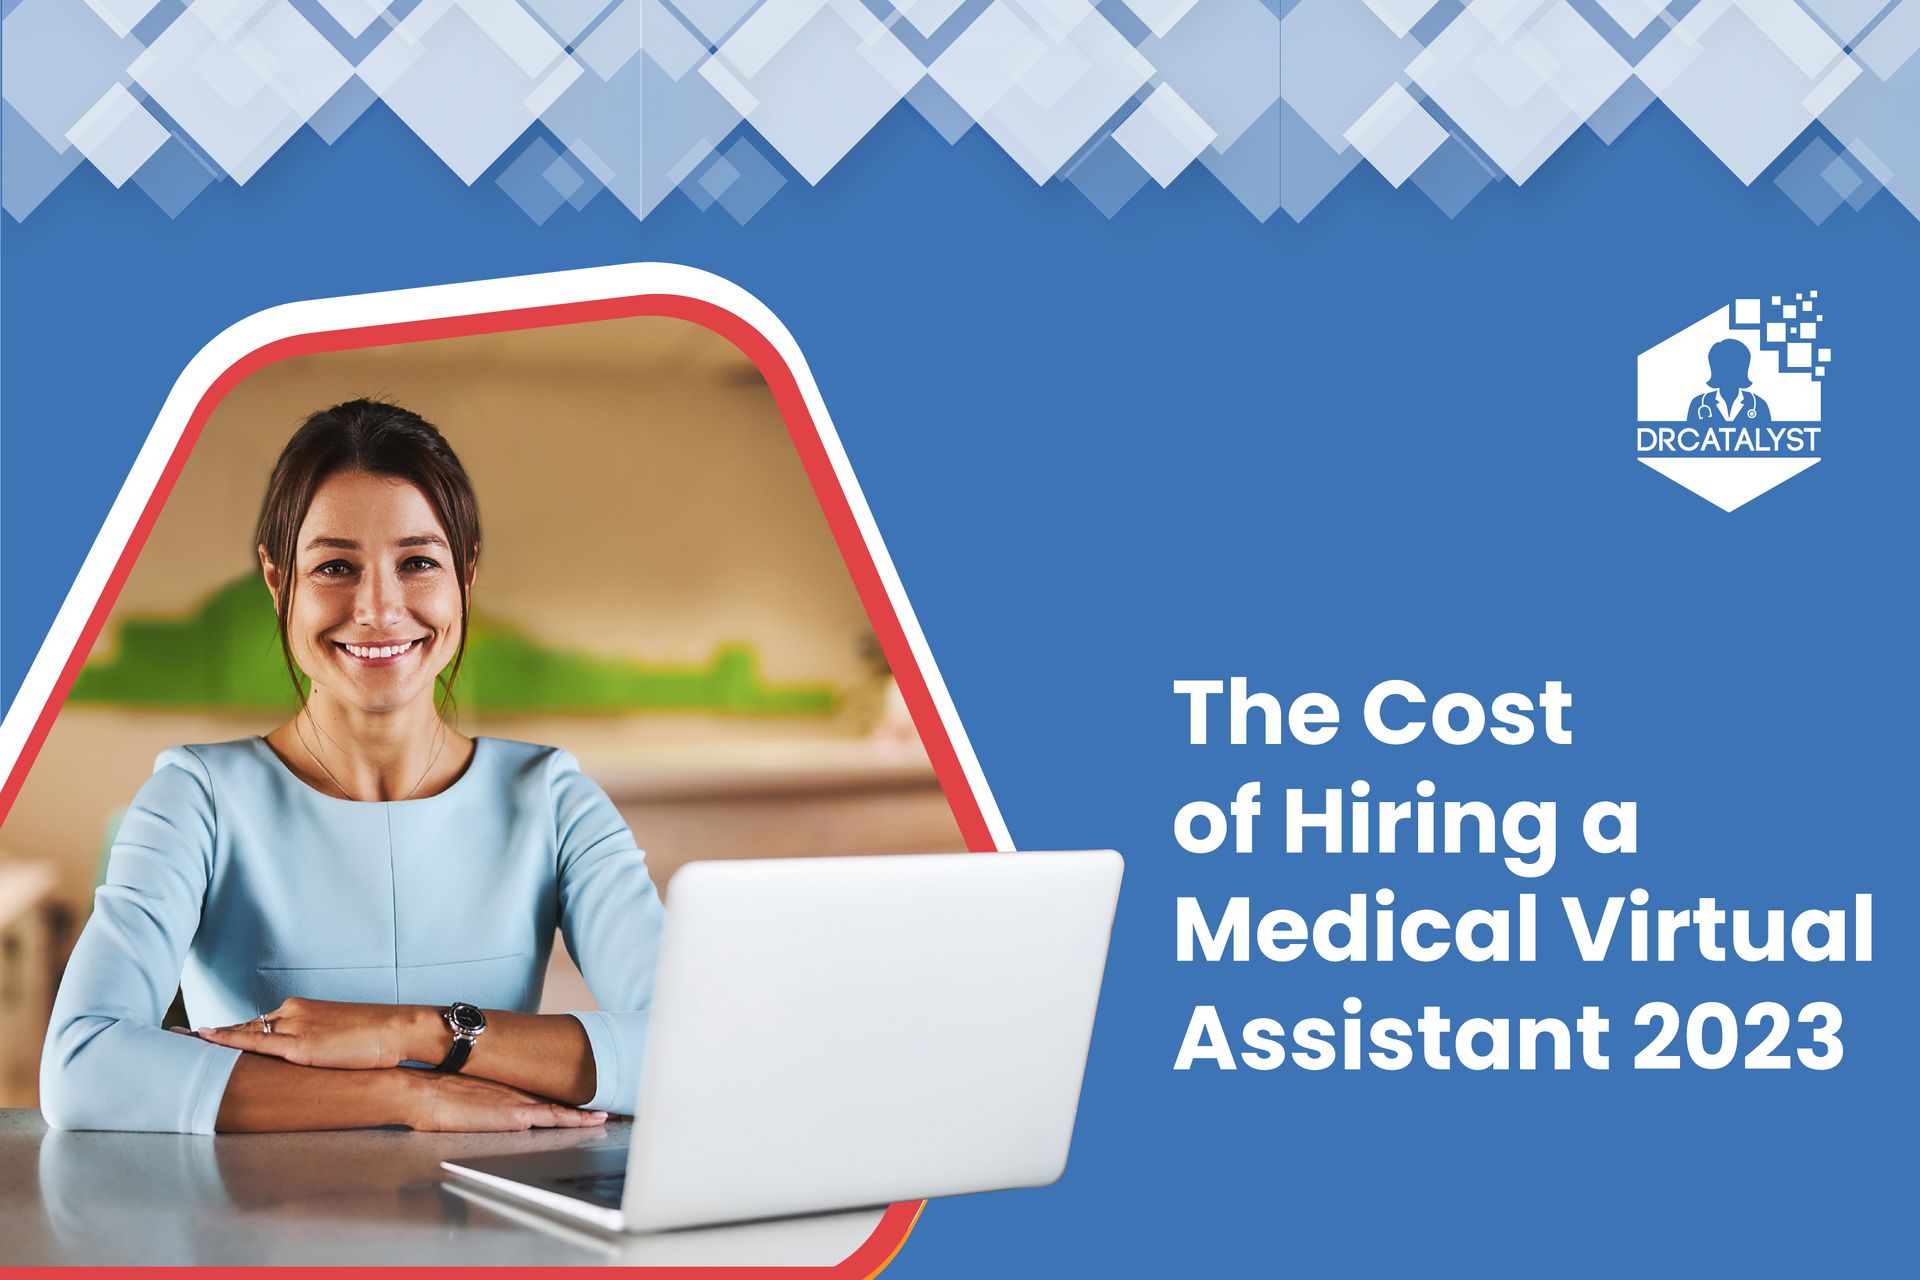 virtual assistant cost